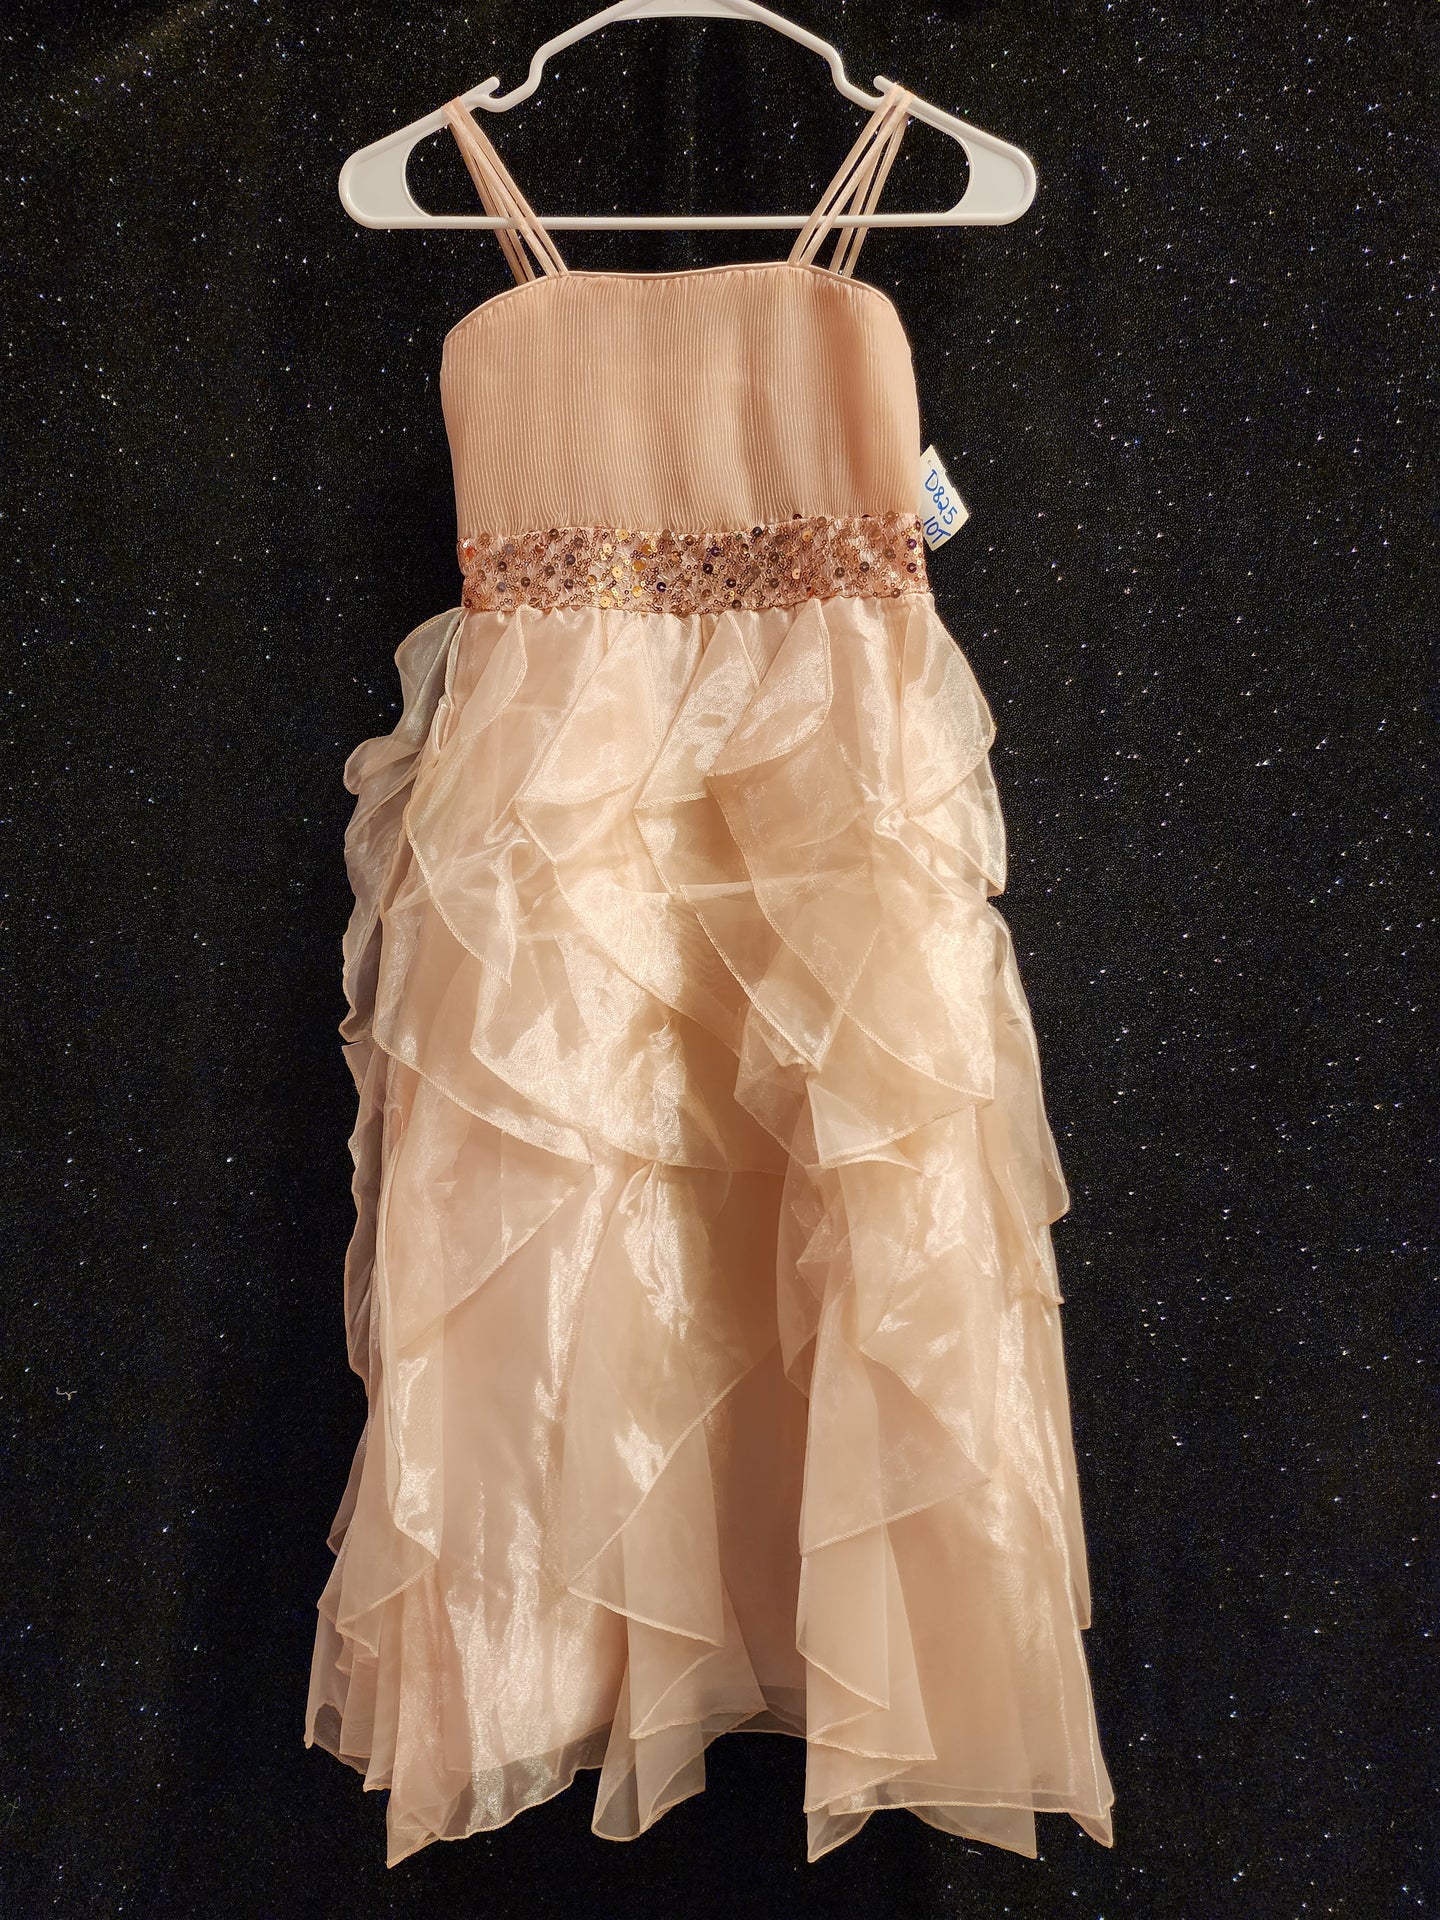 UNKNOWN Style D825 Size 10T Light Pink